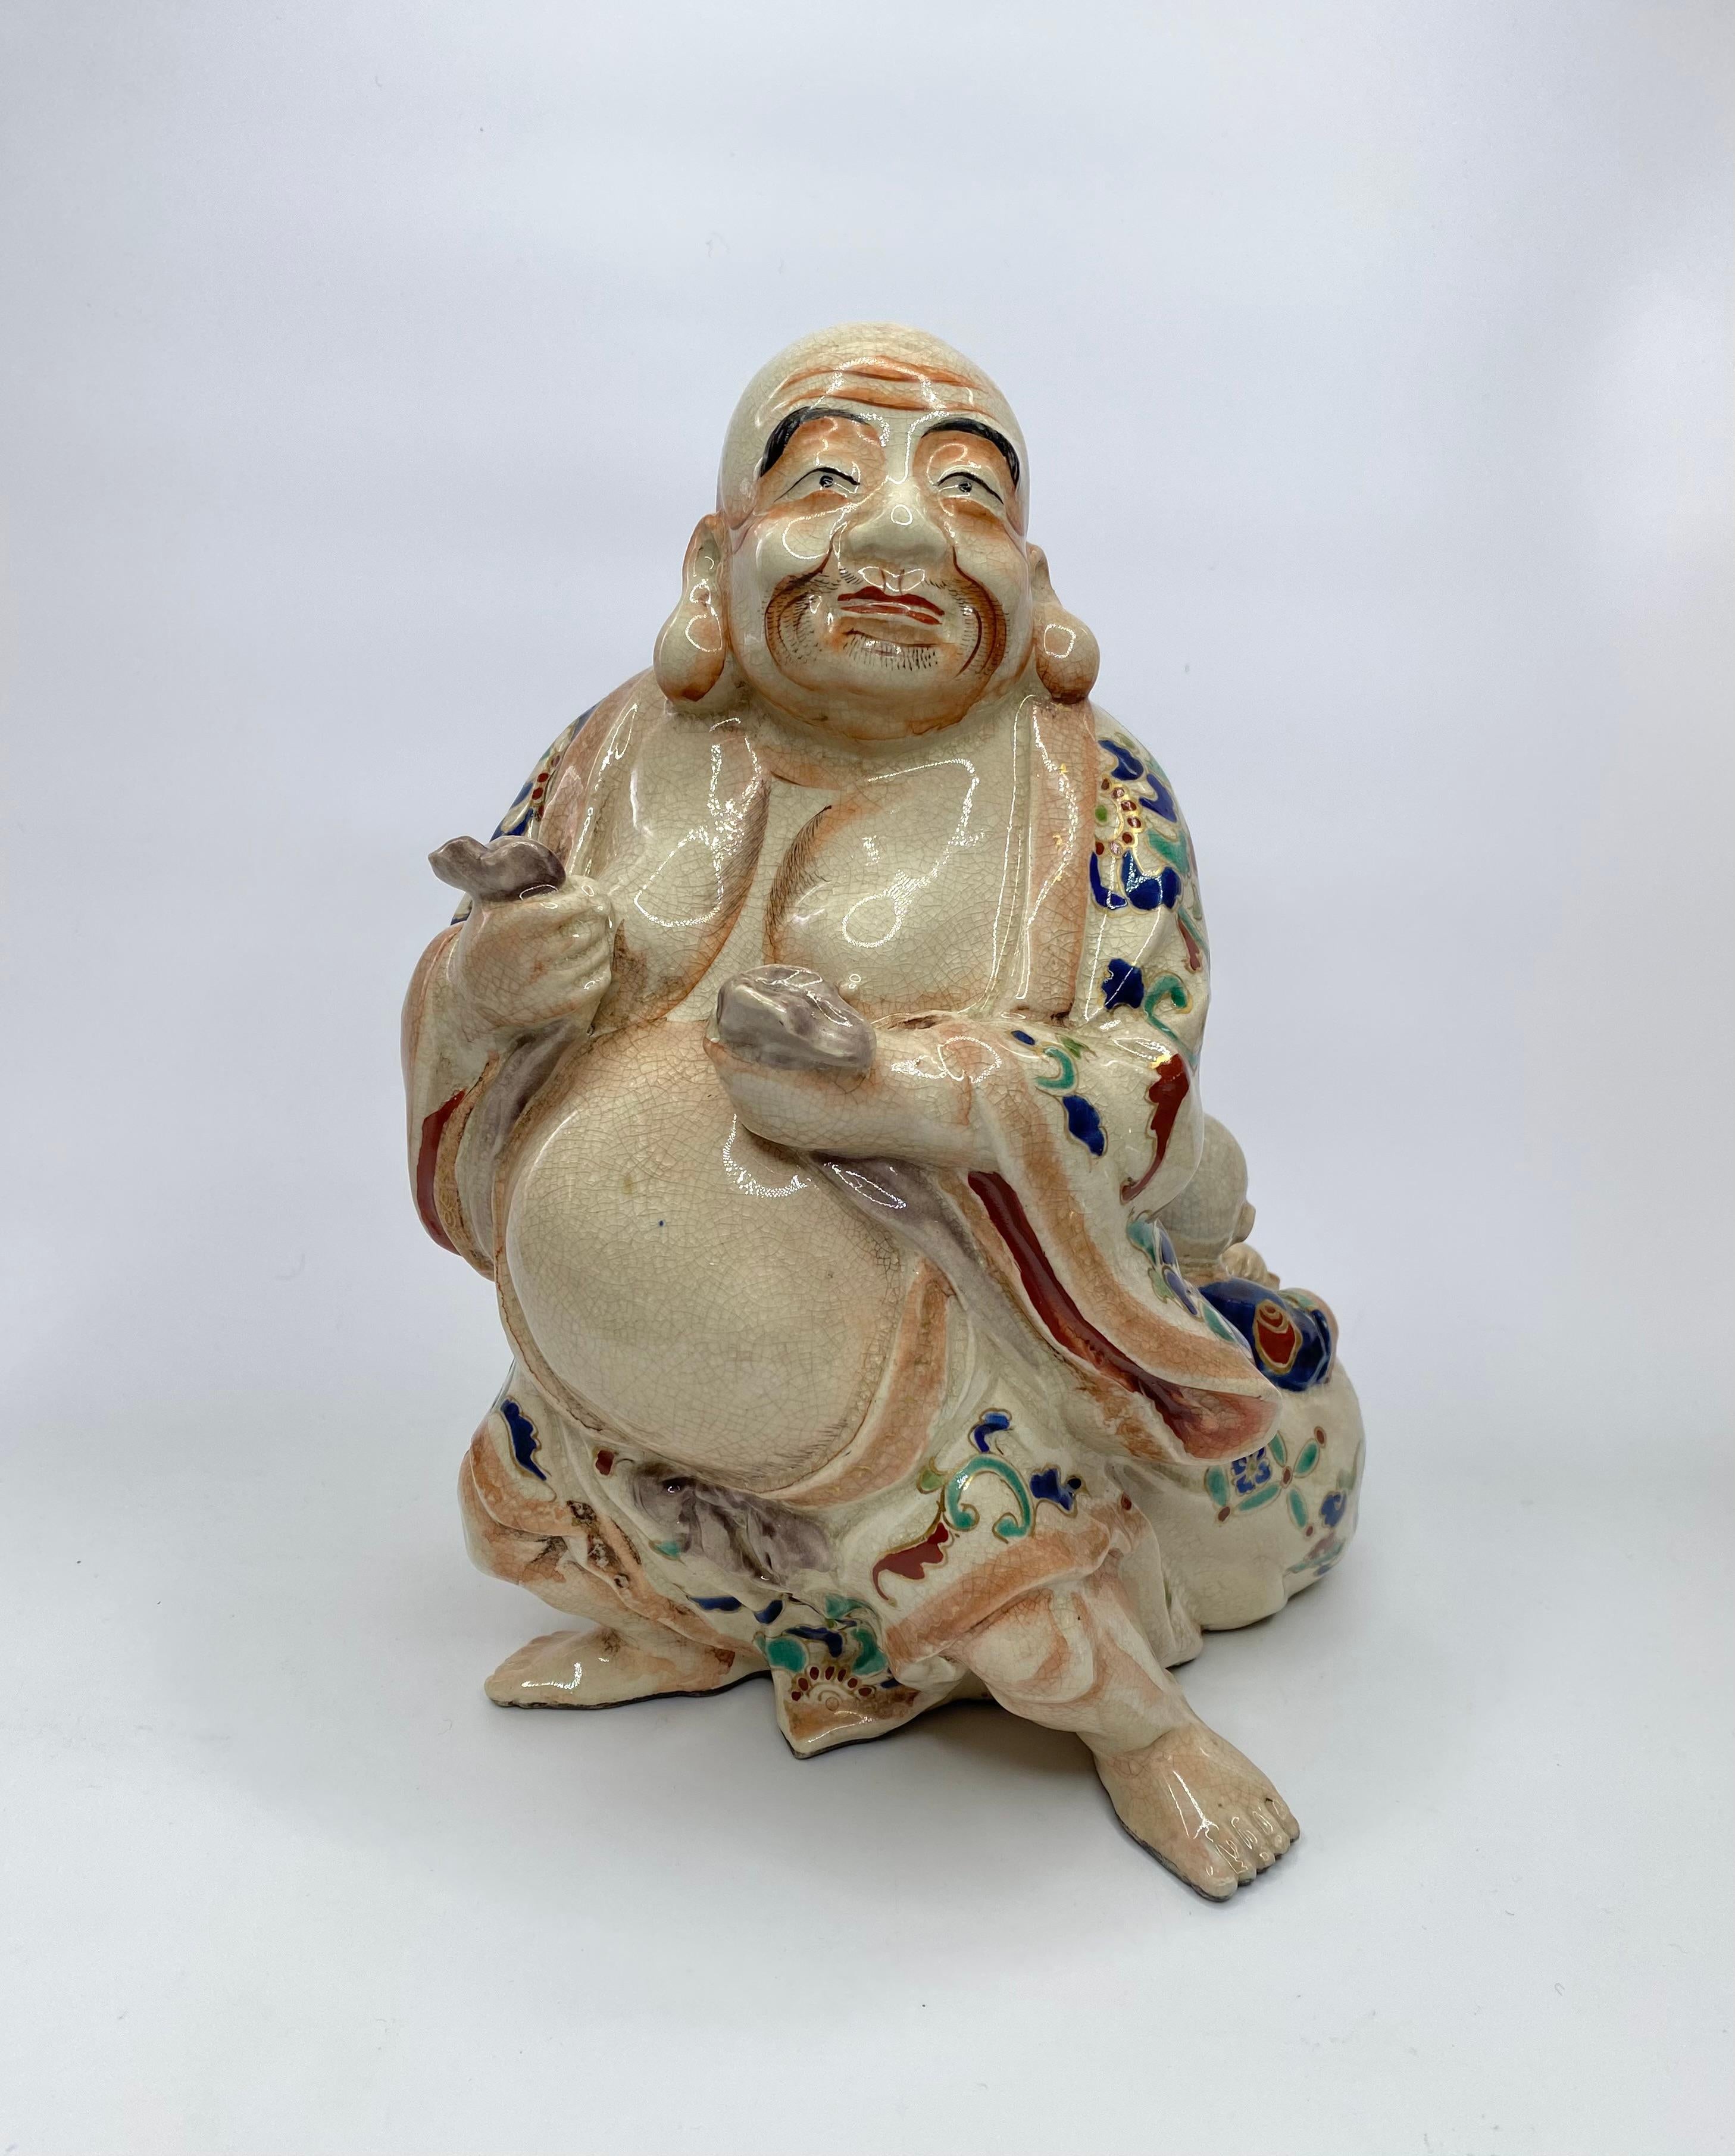 Satsuma pottery figure group, Japan, c. 1890, Meiji Period. The large group, modelled as Hotei standing, with his corpulent belly sticking out of his robes. He drags his large sack, within which, are seated, two smiling boys, carrying a large